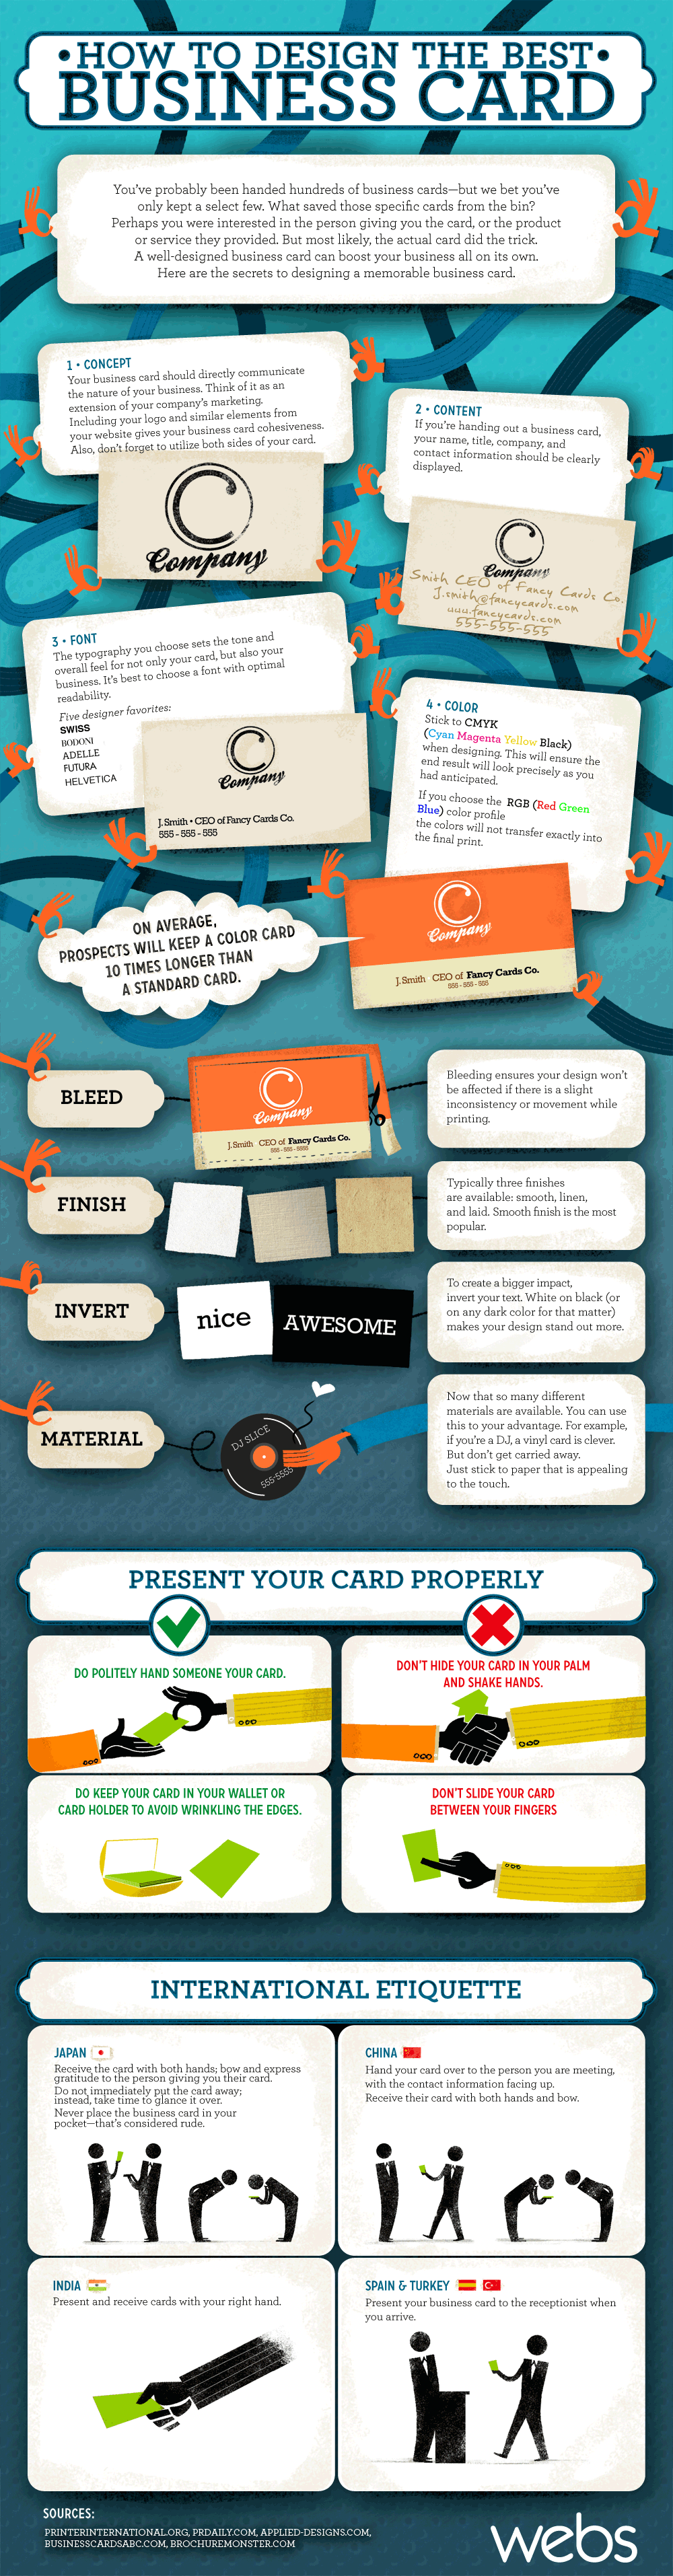 business-card-design-infographic